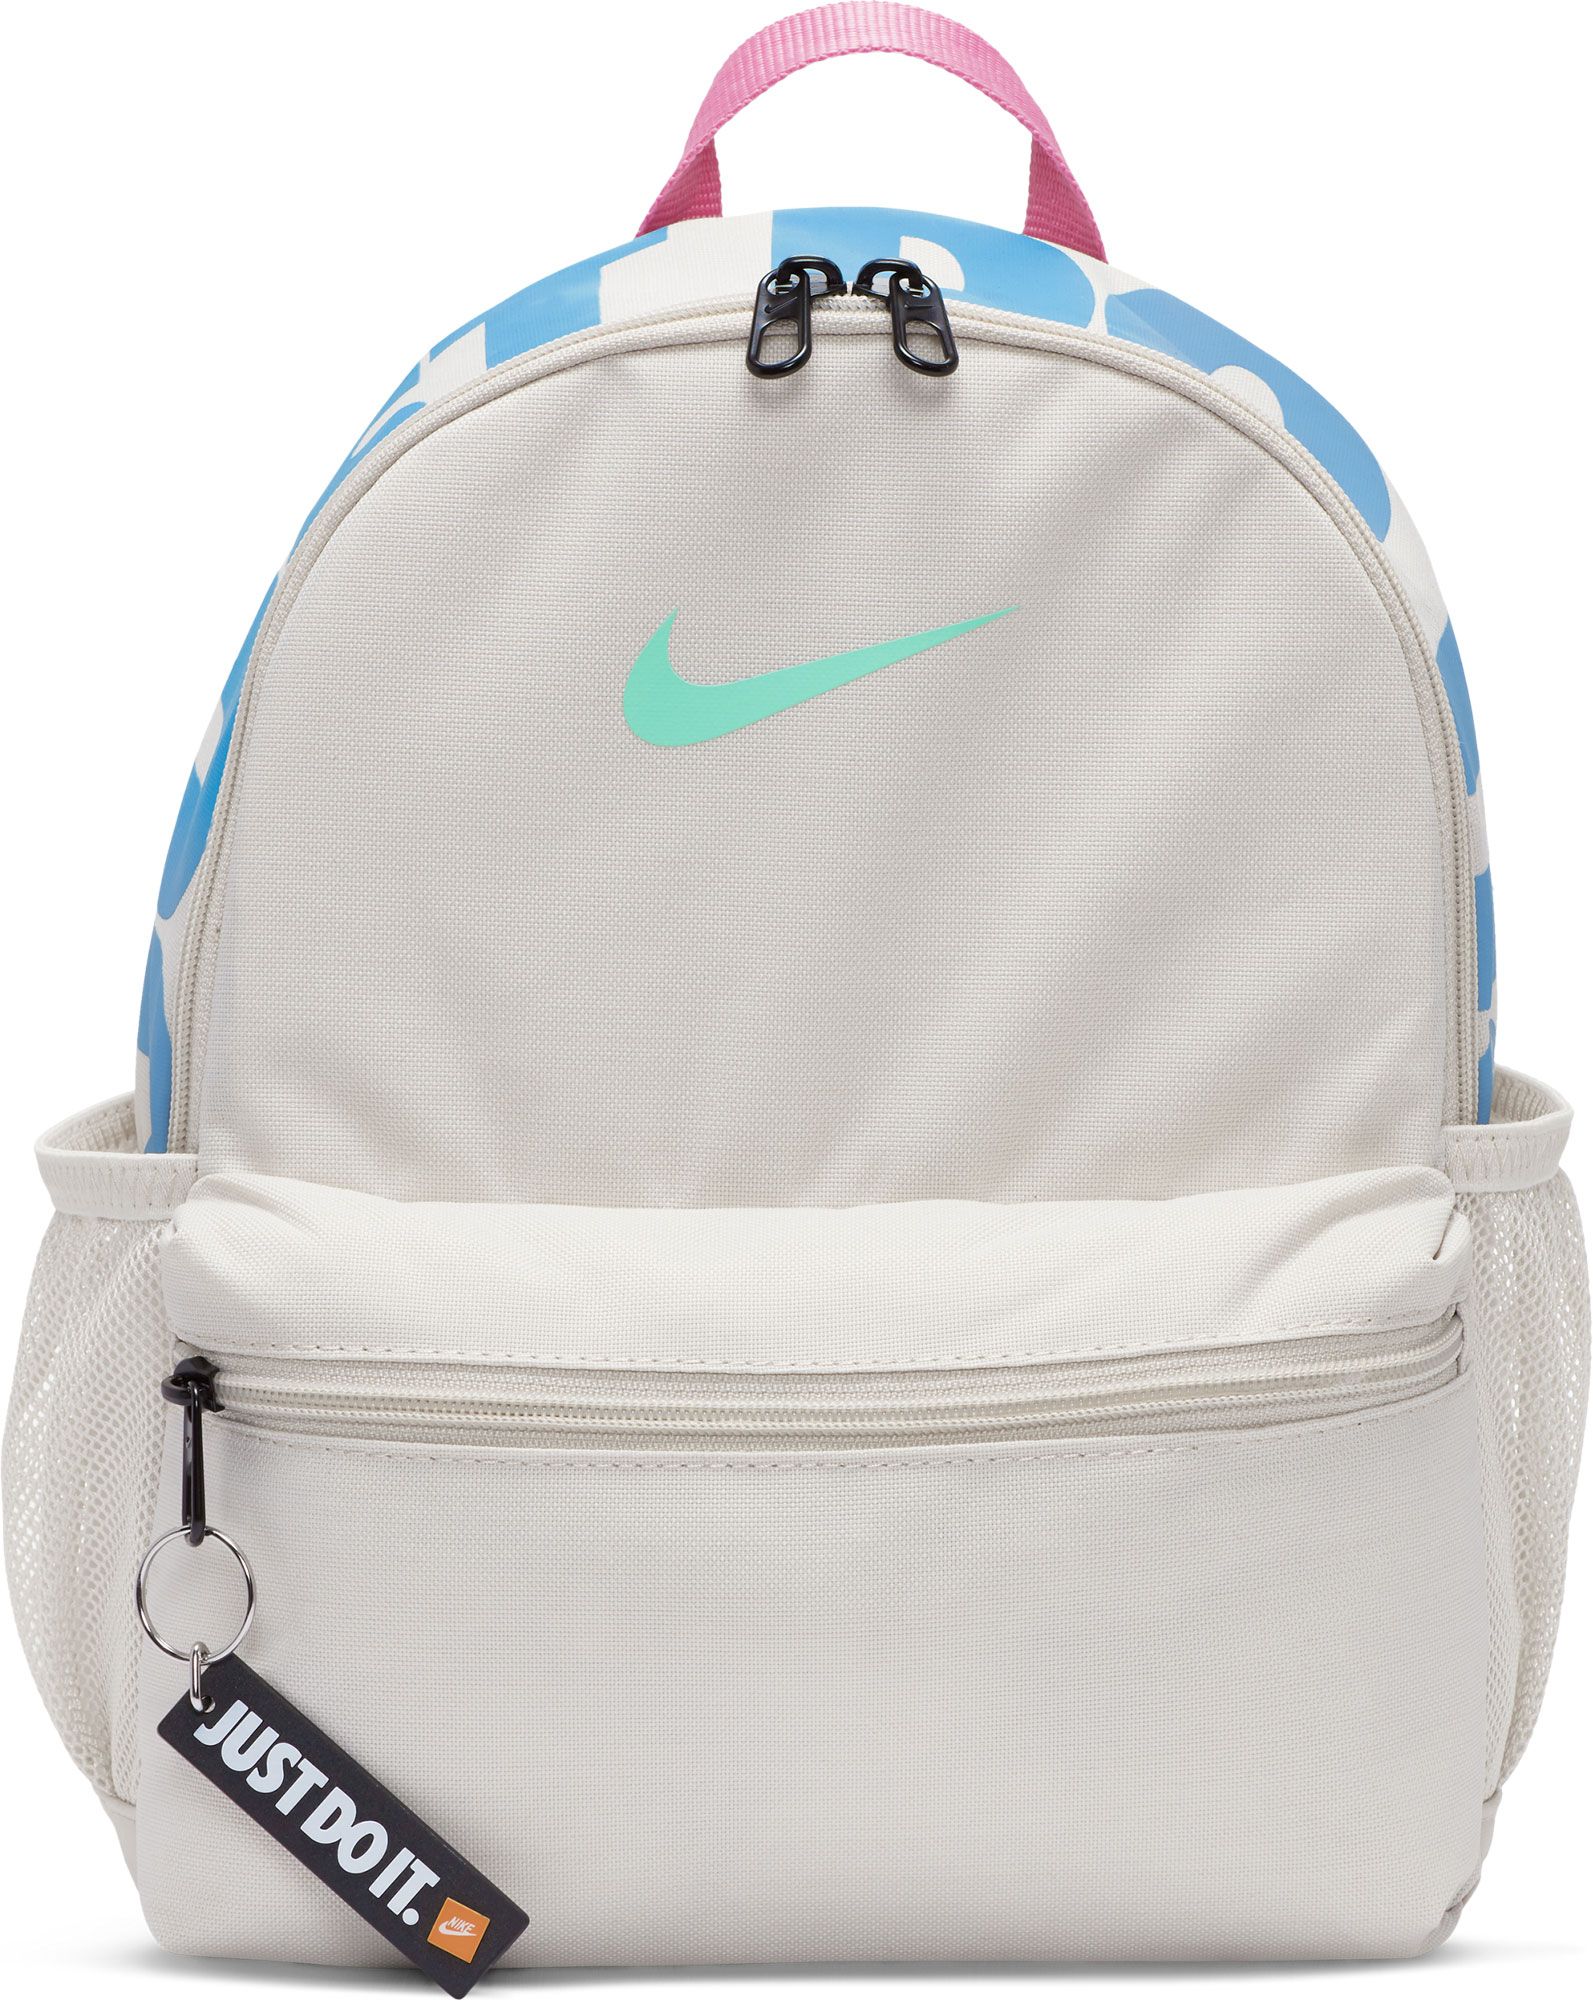 Sports Backpacks | Best Price Guarantee at DICK'S